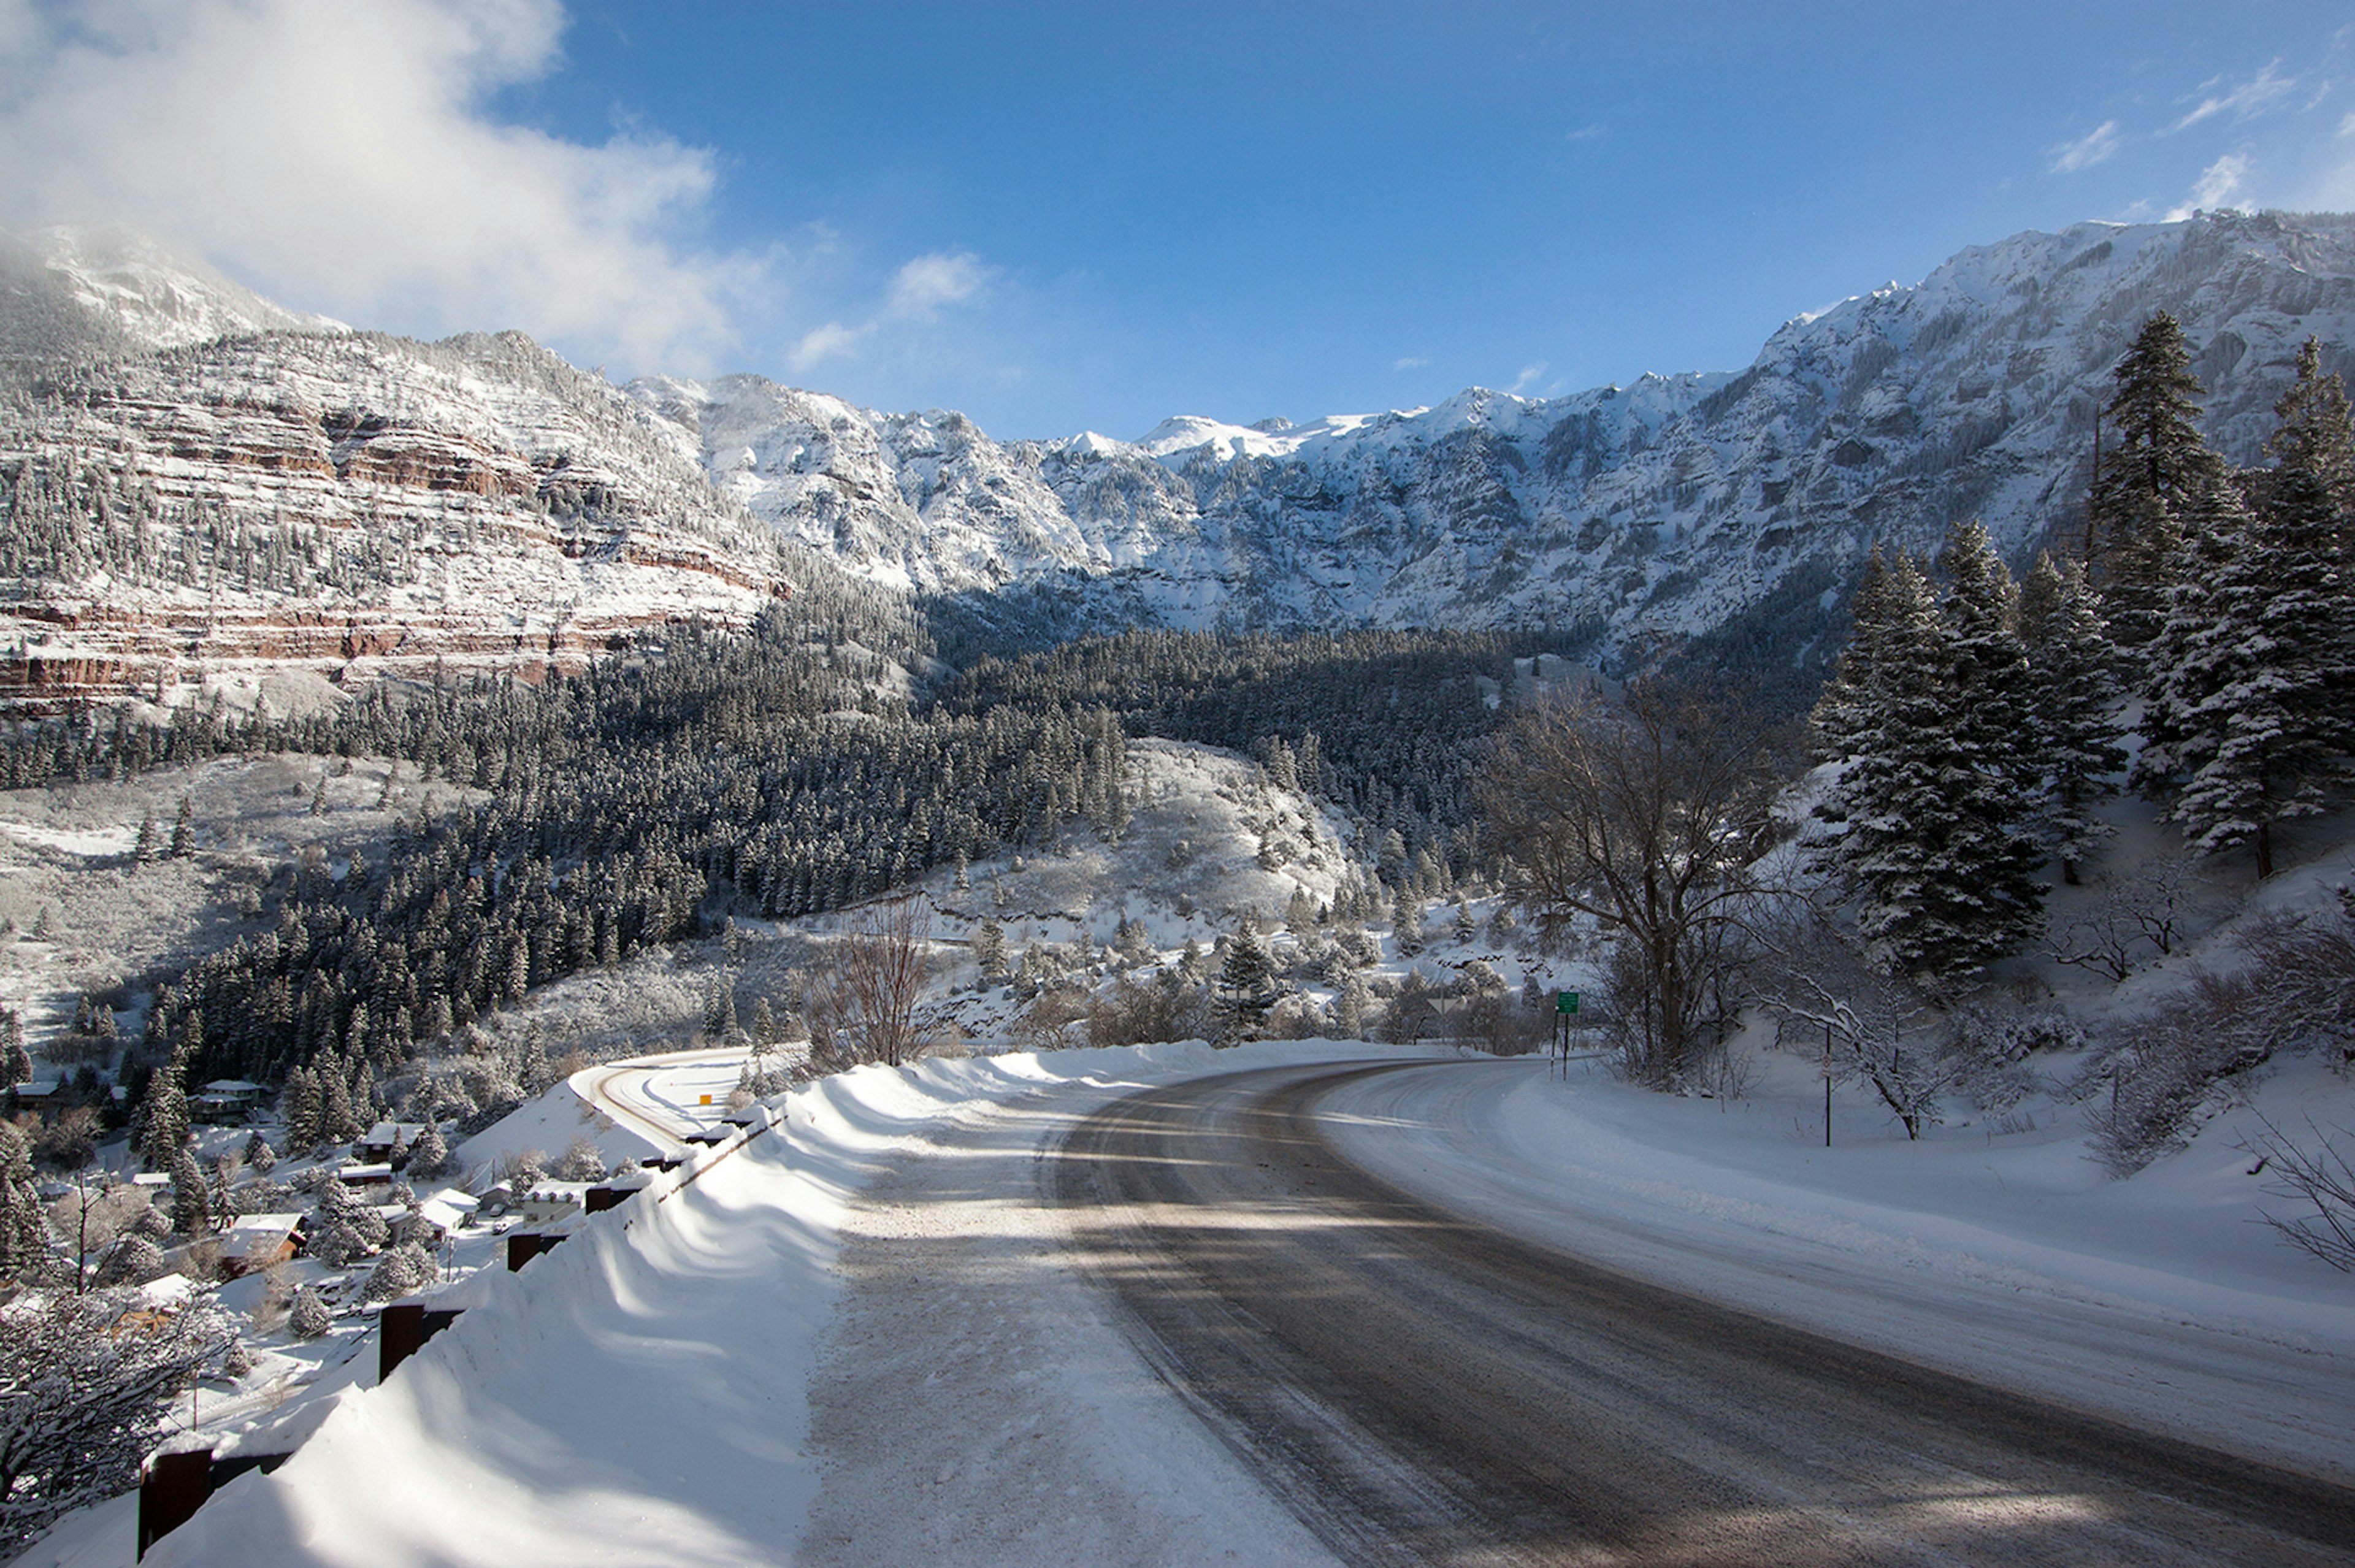 Snow-covered road in the Colorado Rockies. Image by Alan Stark / CC BY-SA 2.0